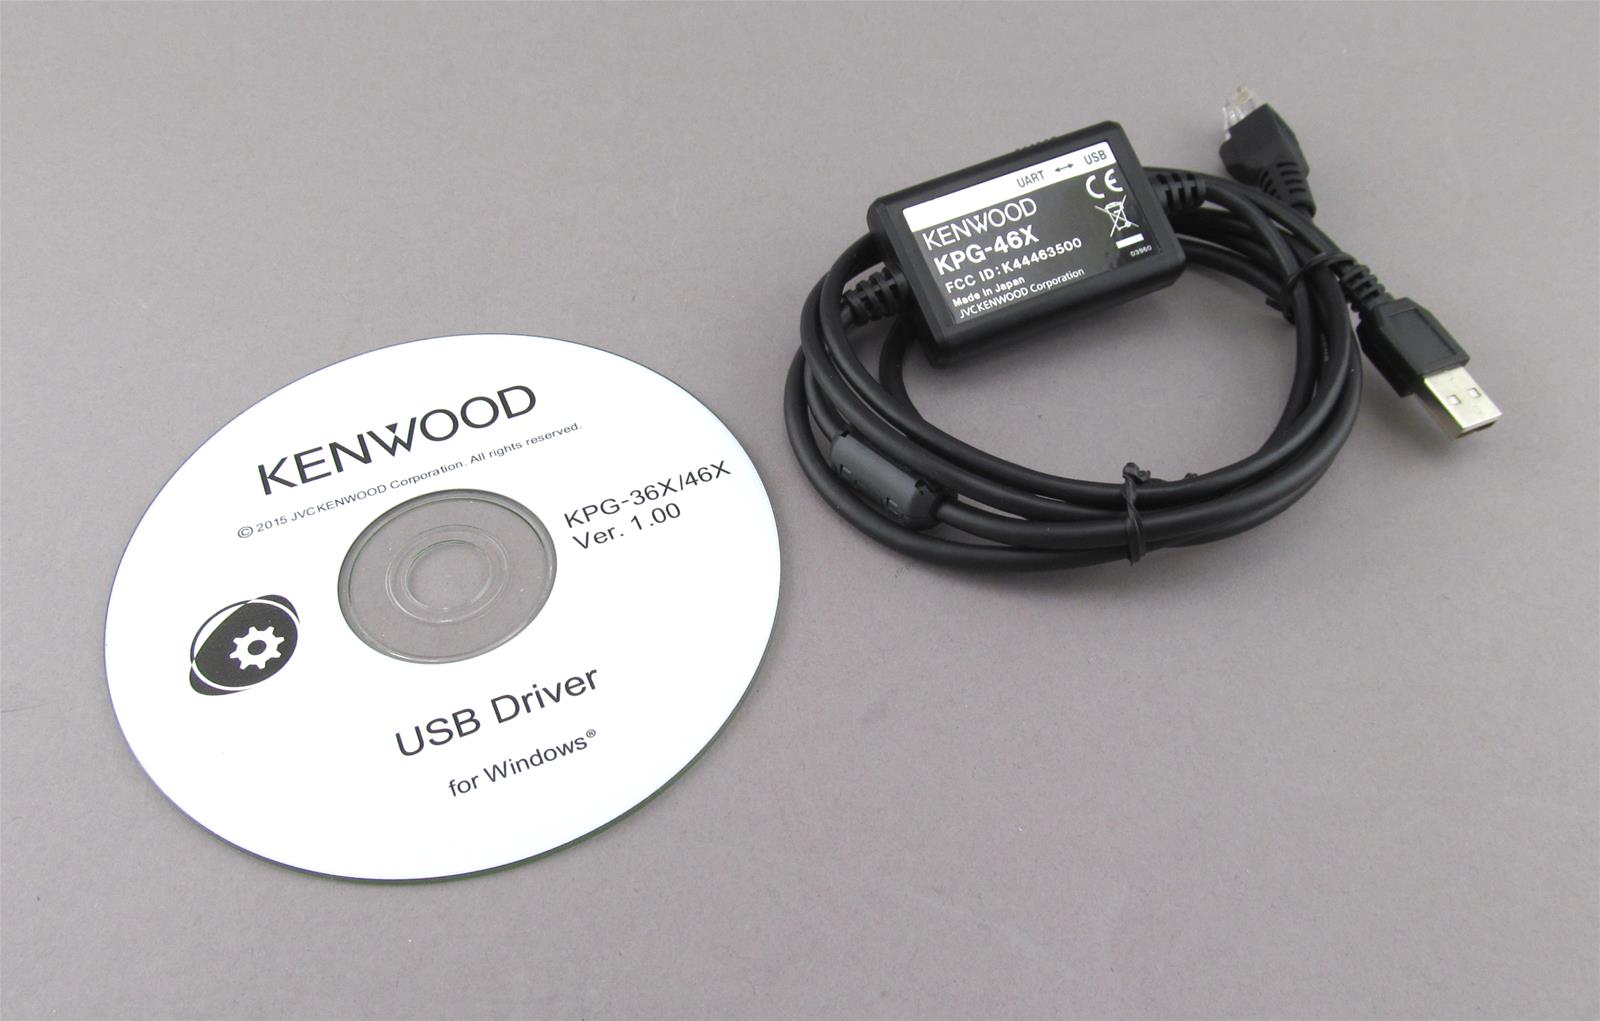 Kenwood PC Control Programming Cables KPG46U Free Shipping on Most Orders Over 99 at DX